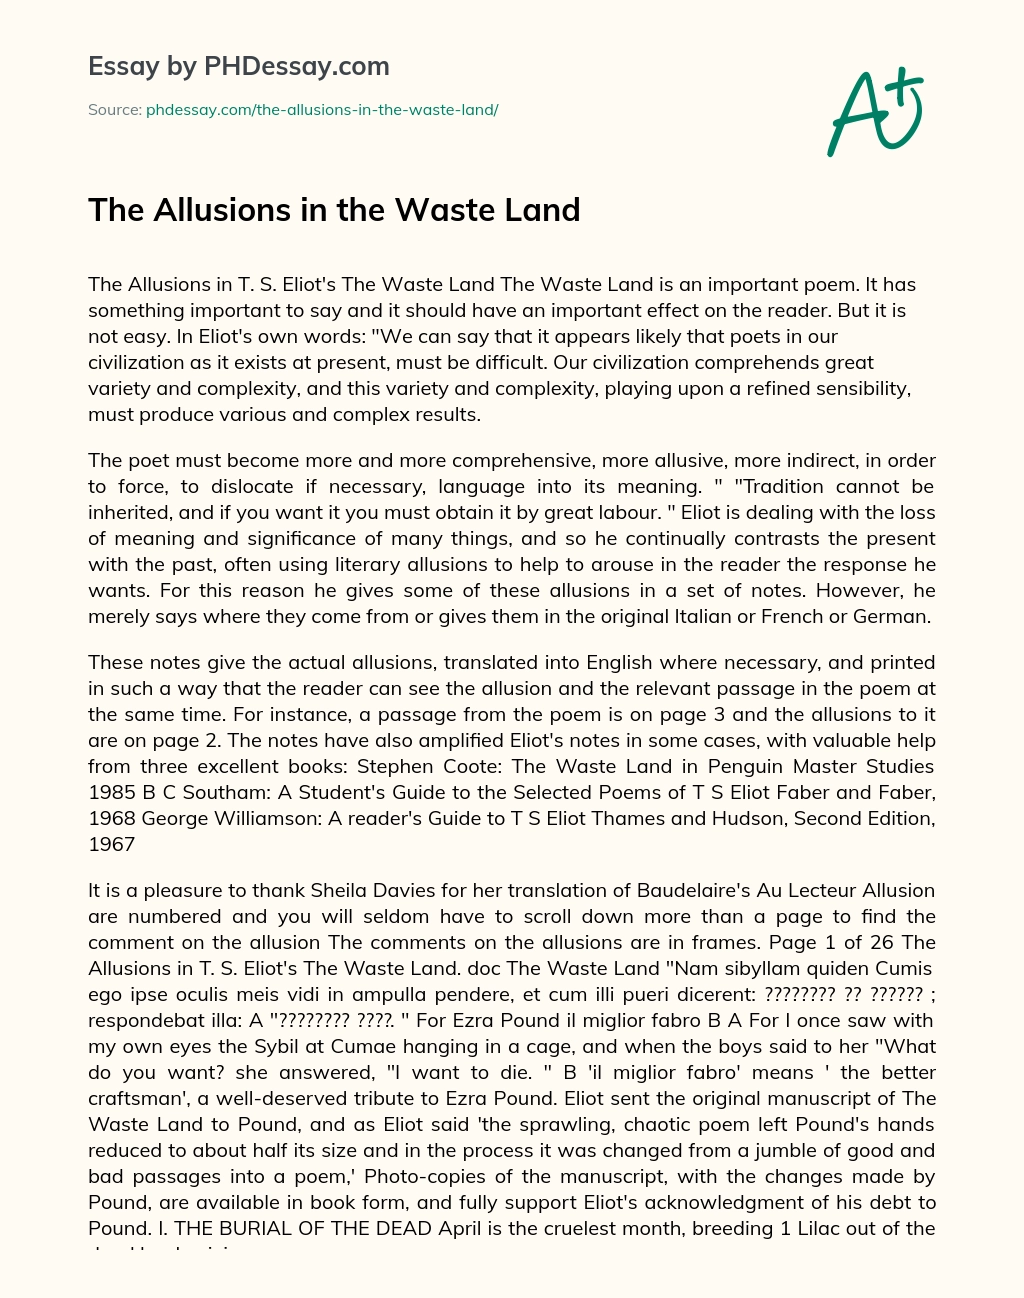 The Allusions in the Waste Land essay